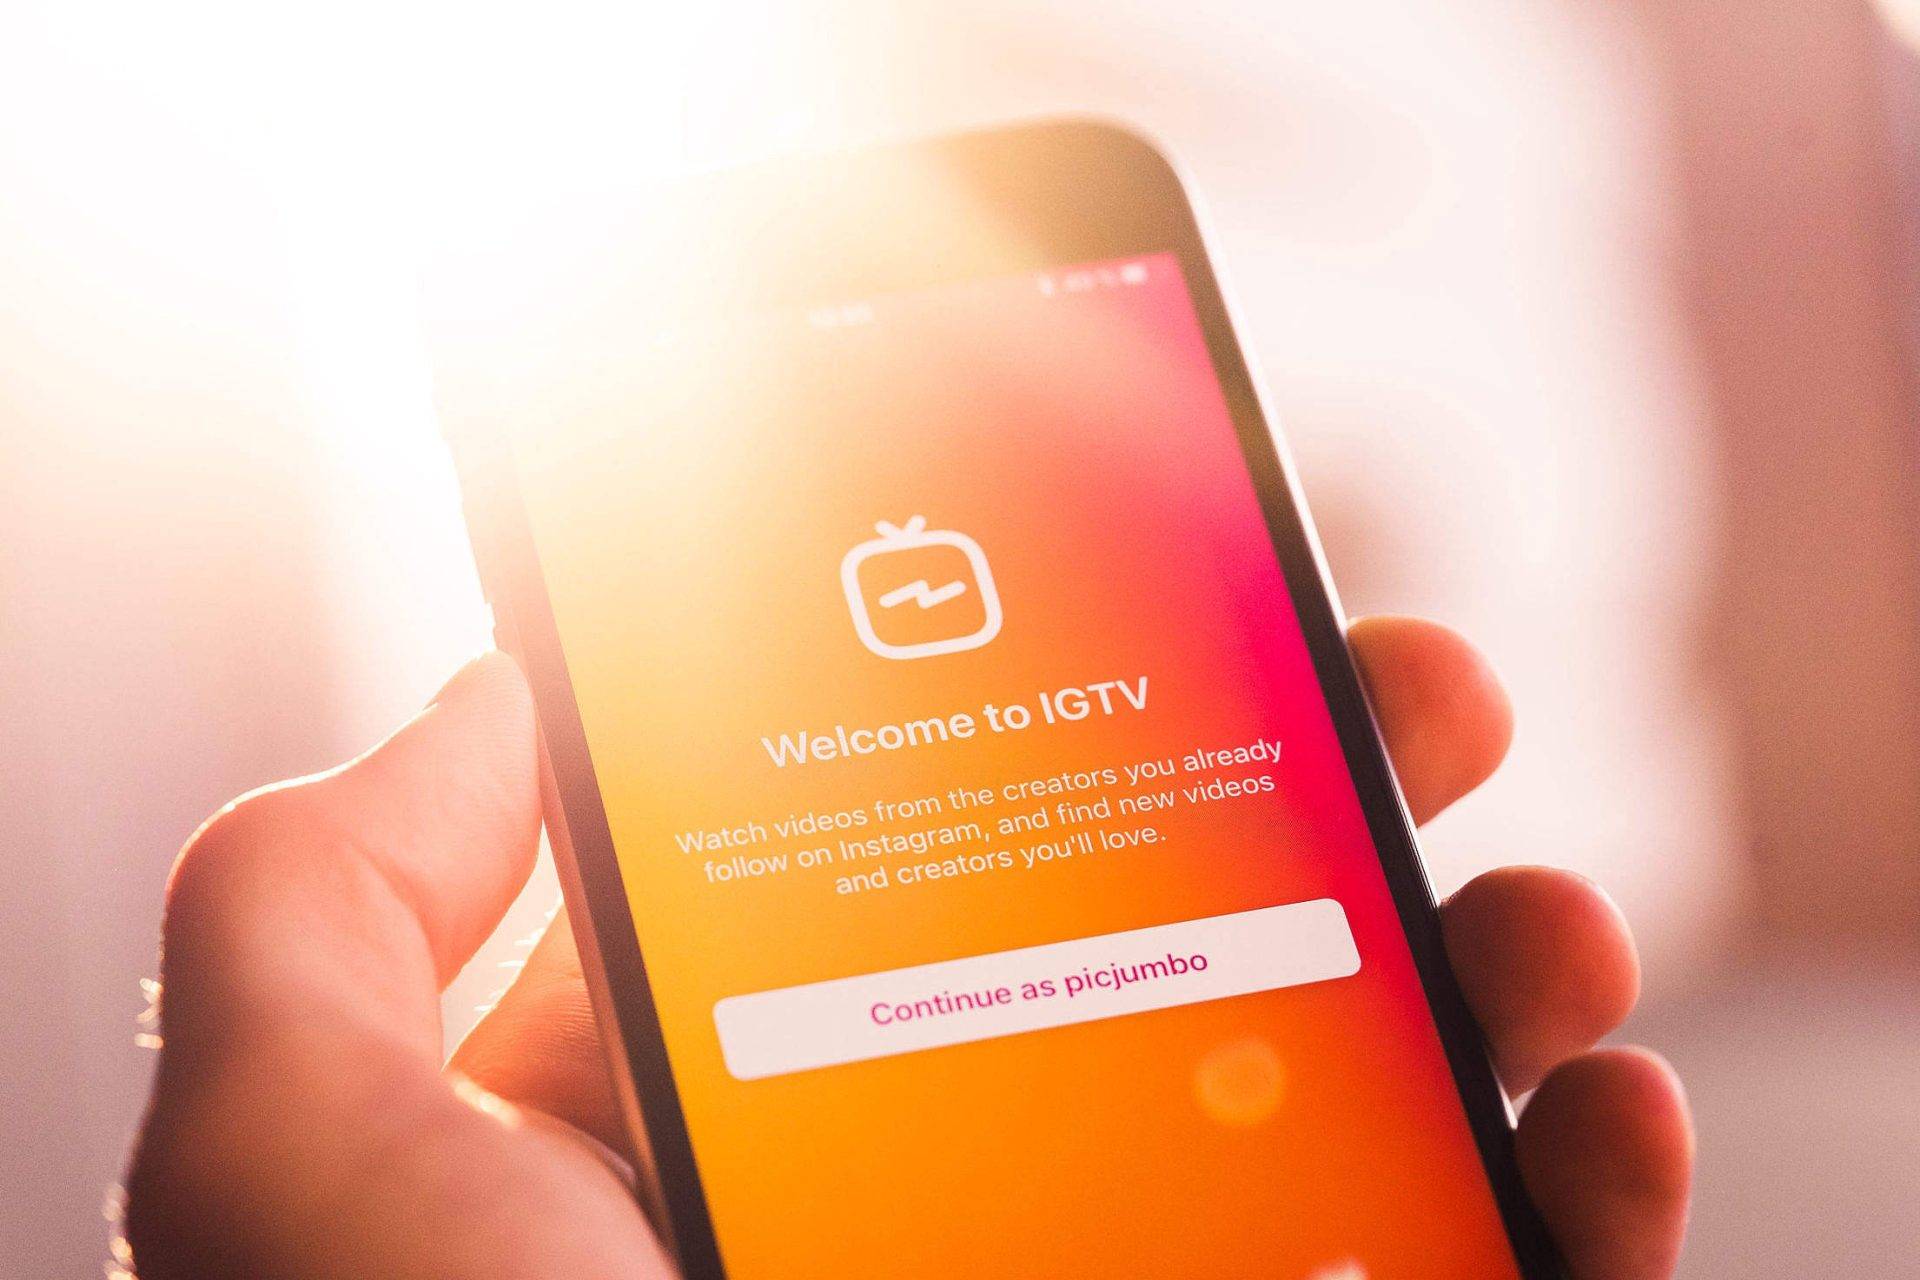  A hand holding a phone with the Instagram app open on the 'Welcome to IGTV' screen, which displays system requirements for the app.